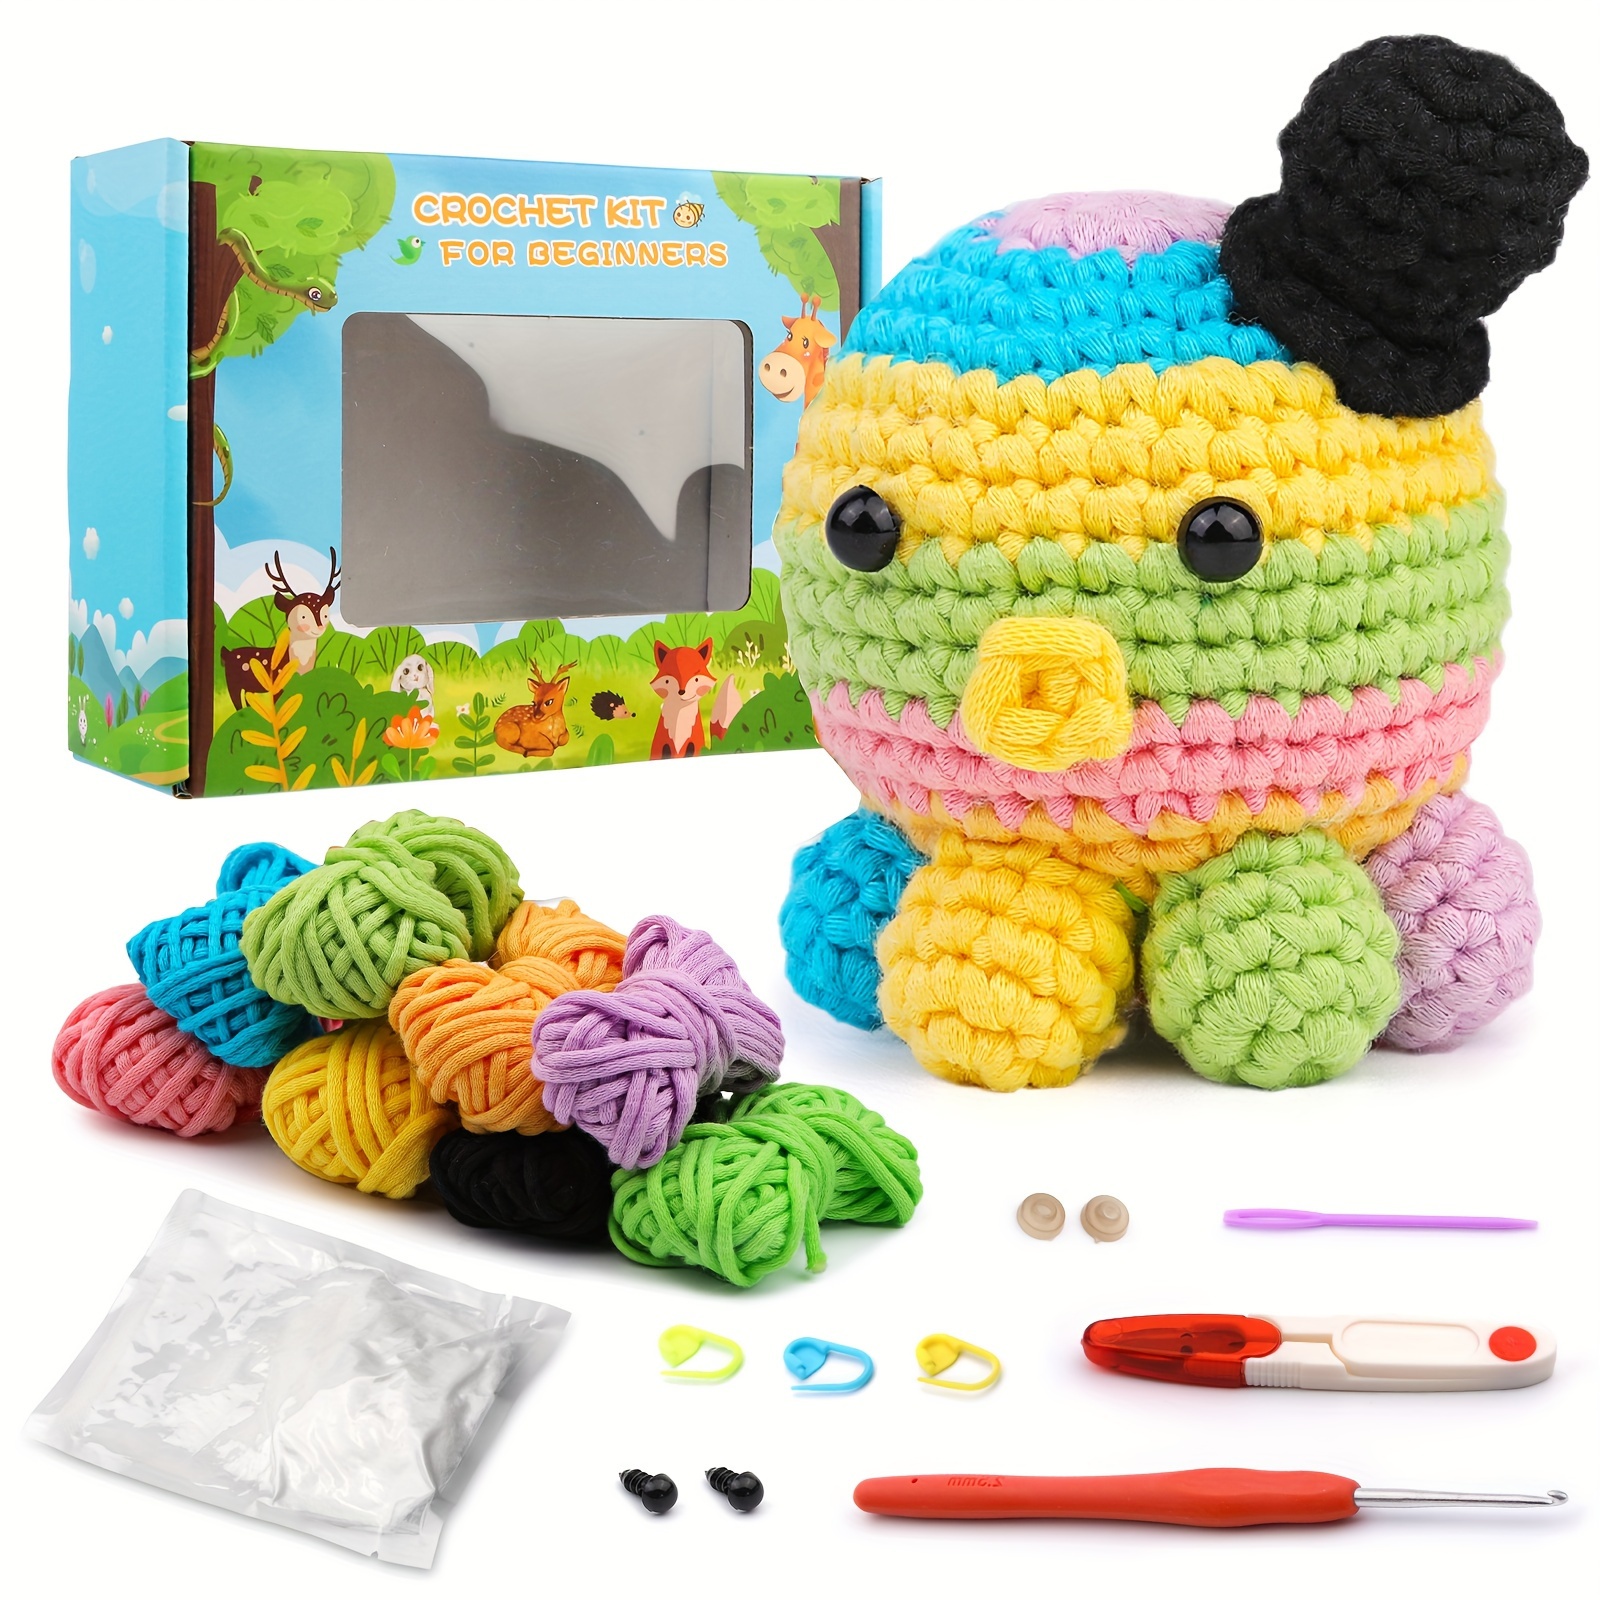 Crochet Kit for Beginners - Beginner Crochet Starter Kit with Step-by-Step  Video Tutorials, Learn to Crochet Kits for Adults and Kids, DIY Knitting  Supplies, 4 Pack Plants Family(40%+ Yarn) 